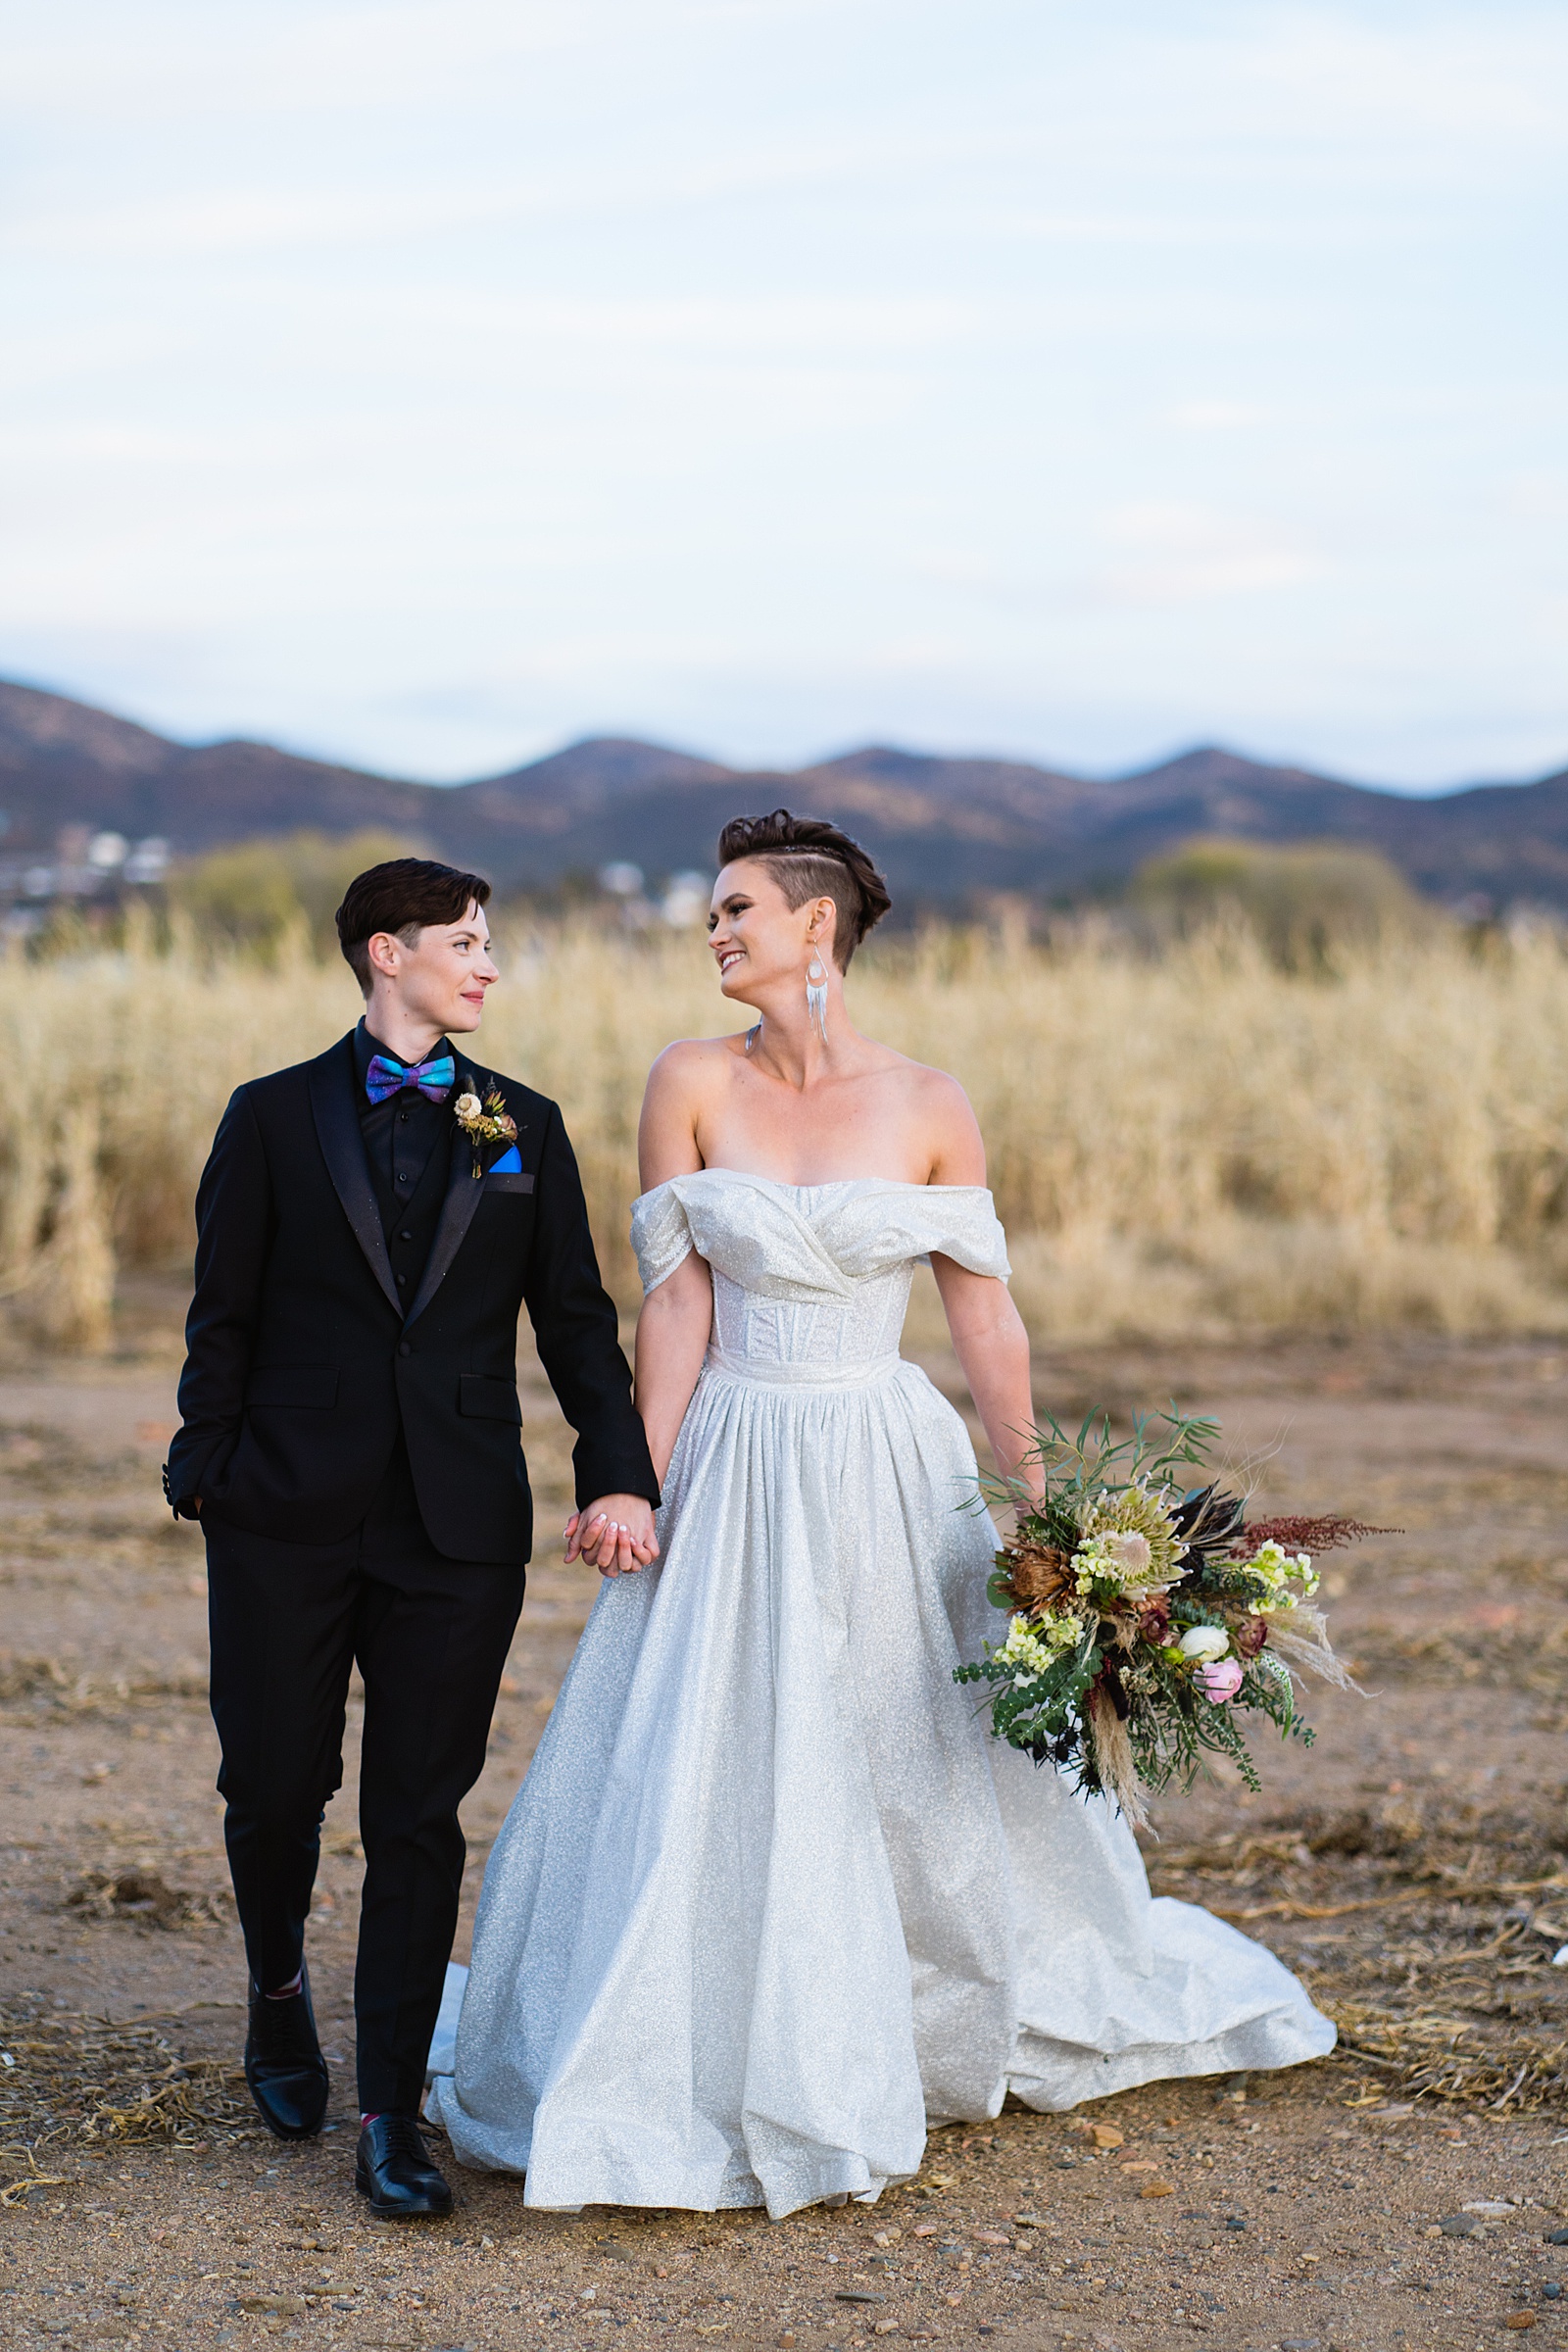 Same sex couple looking at each other during their Mortimer Farms wedding by Prescott wedding photographer PMA Photography.